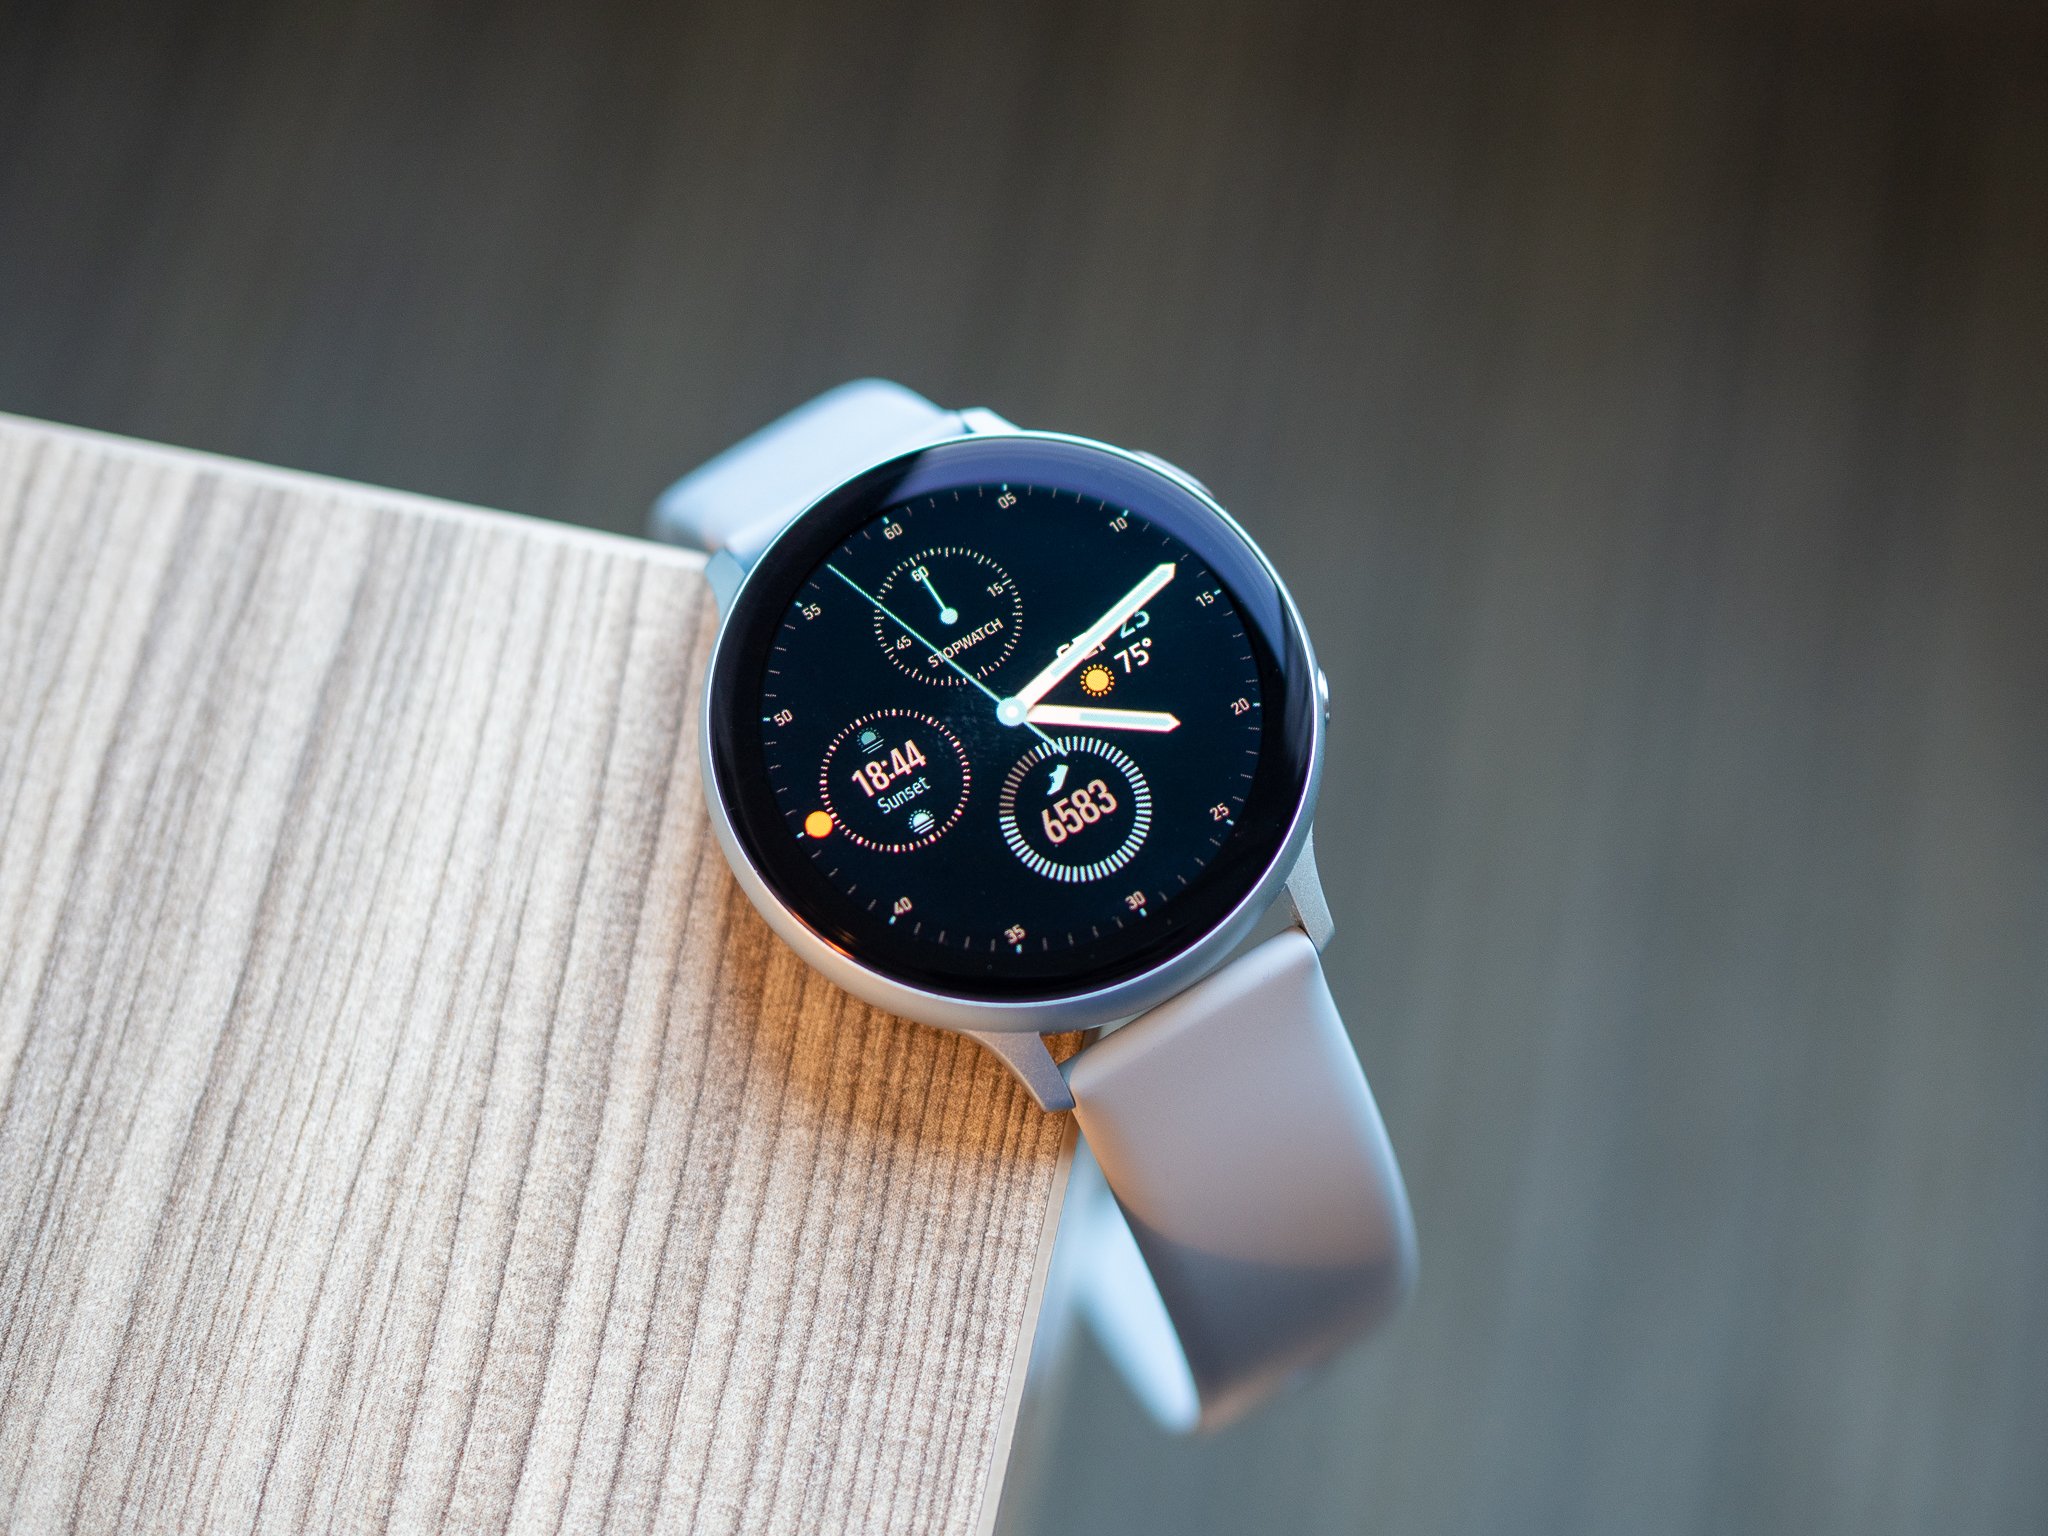 Upgraded Health and Personalization Features Come to Galaxy Watch, Galaxy  Watch Active, Galaxy Watch Active2 and Galaxy Watch3 – Samsung Mobile Press